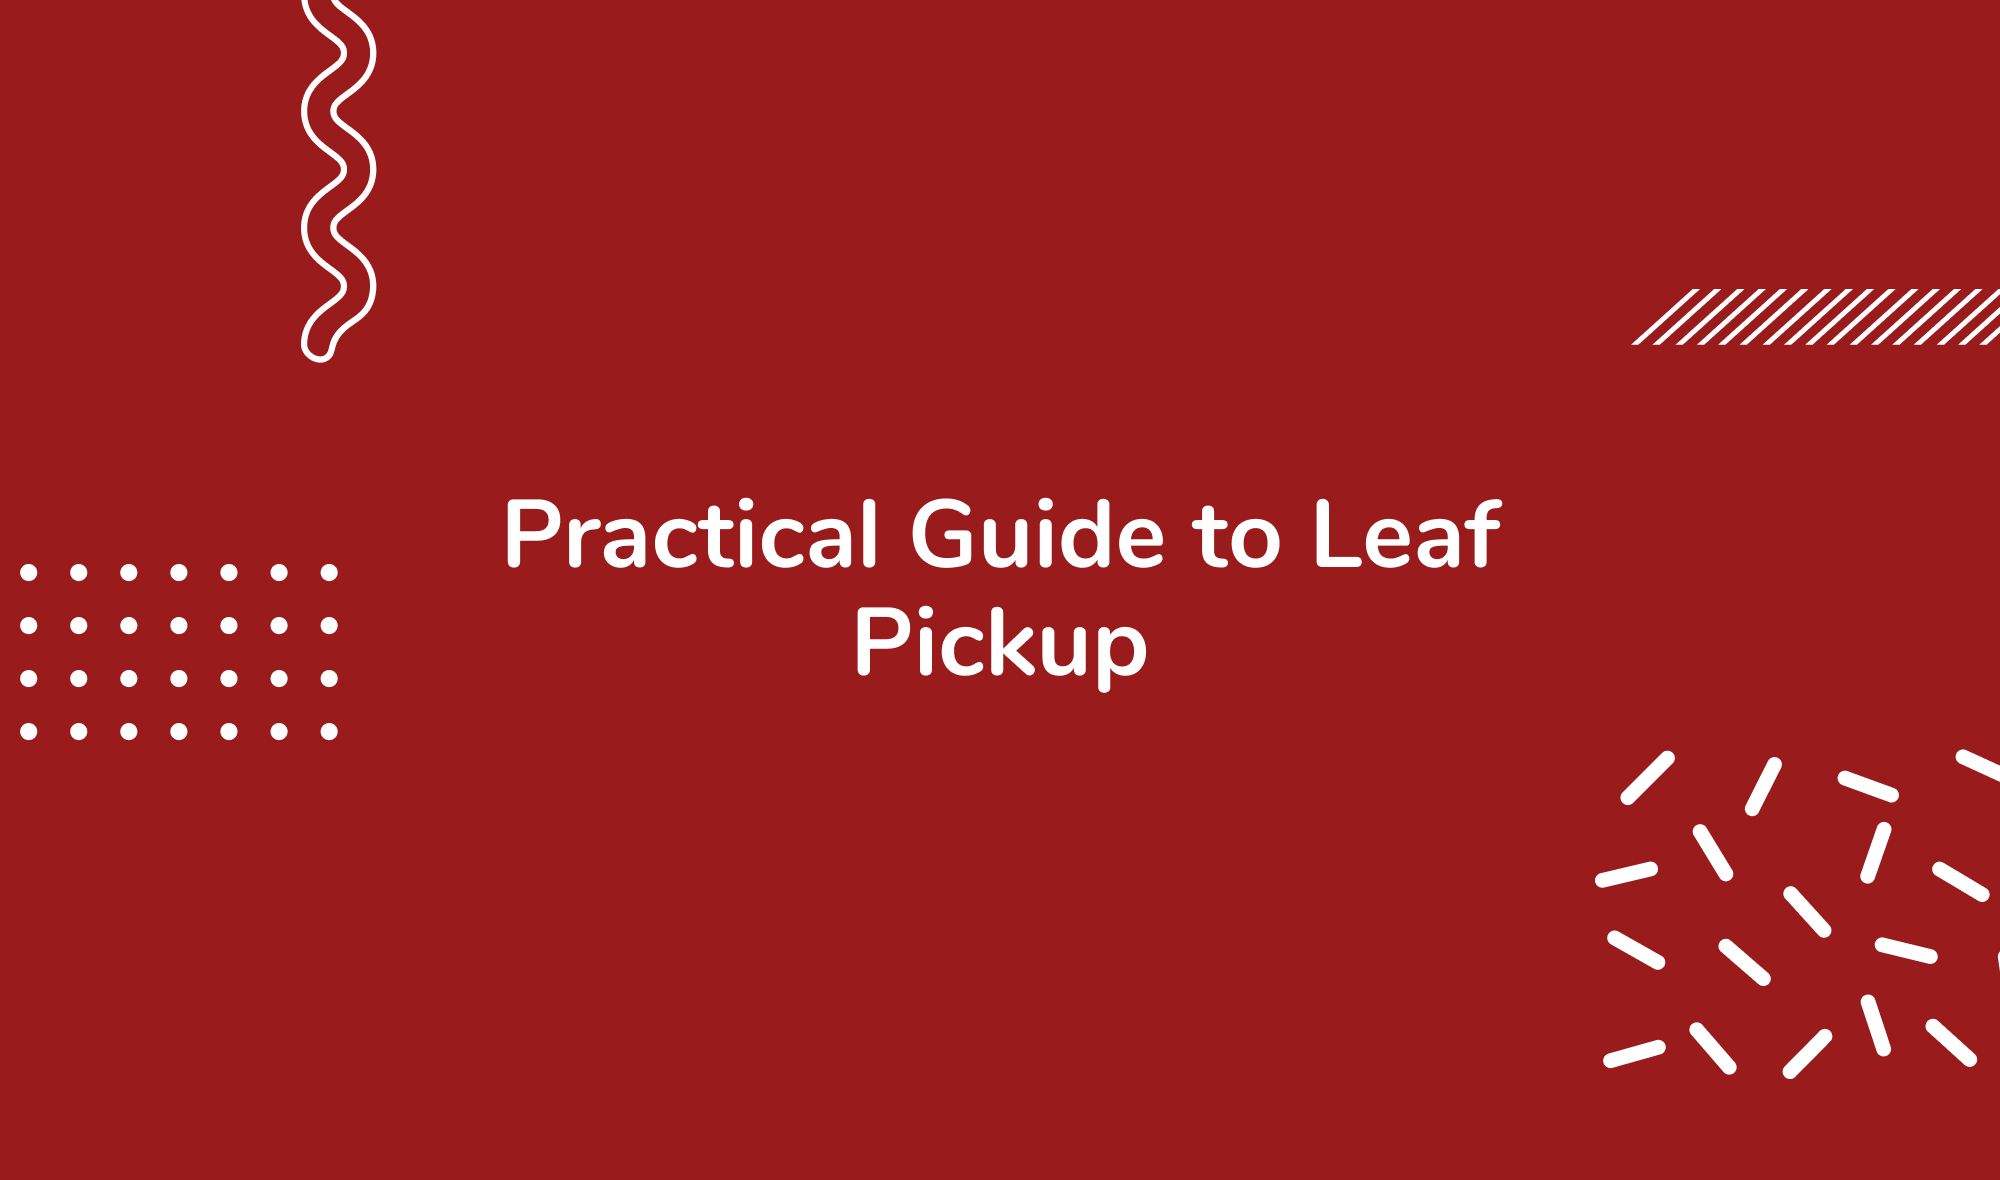 Practical Guide to Leaf Pickup